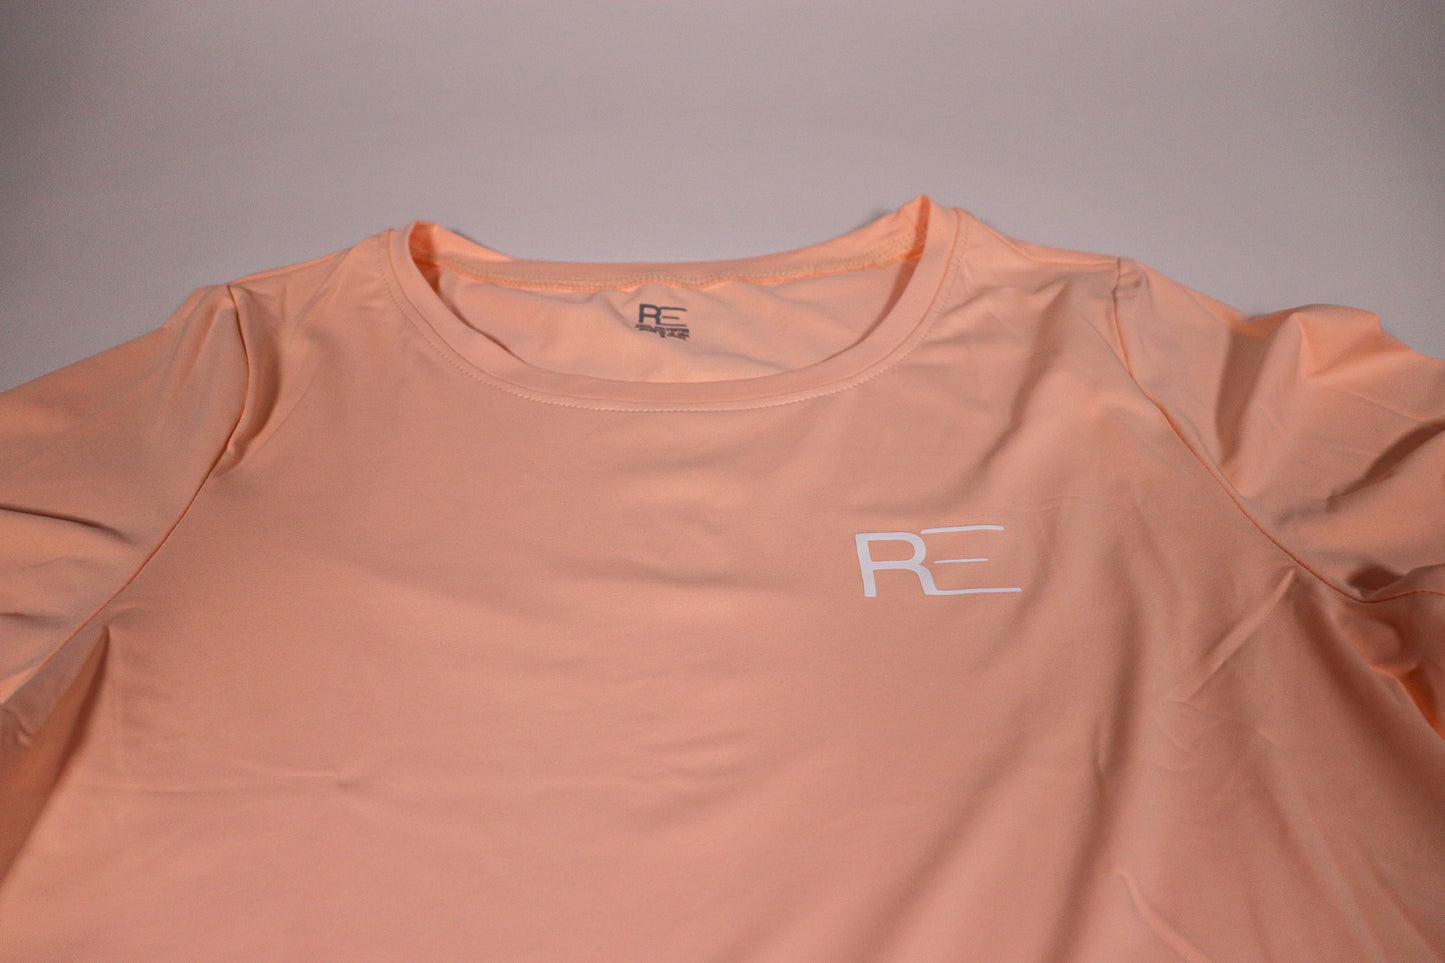 Performance buttery soft scoop neck